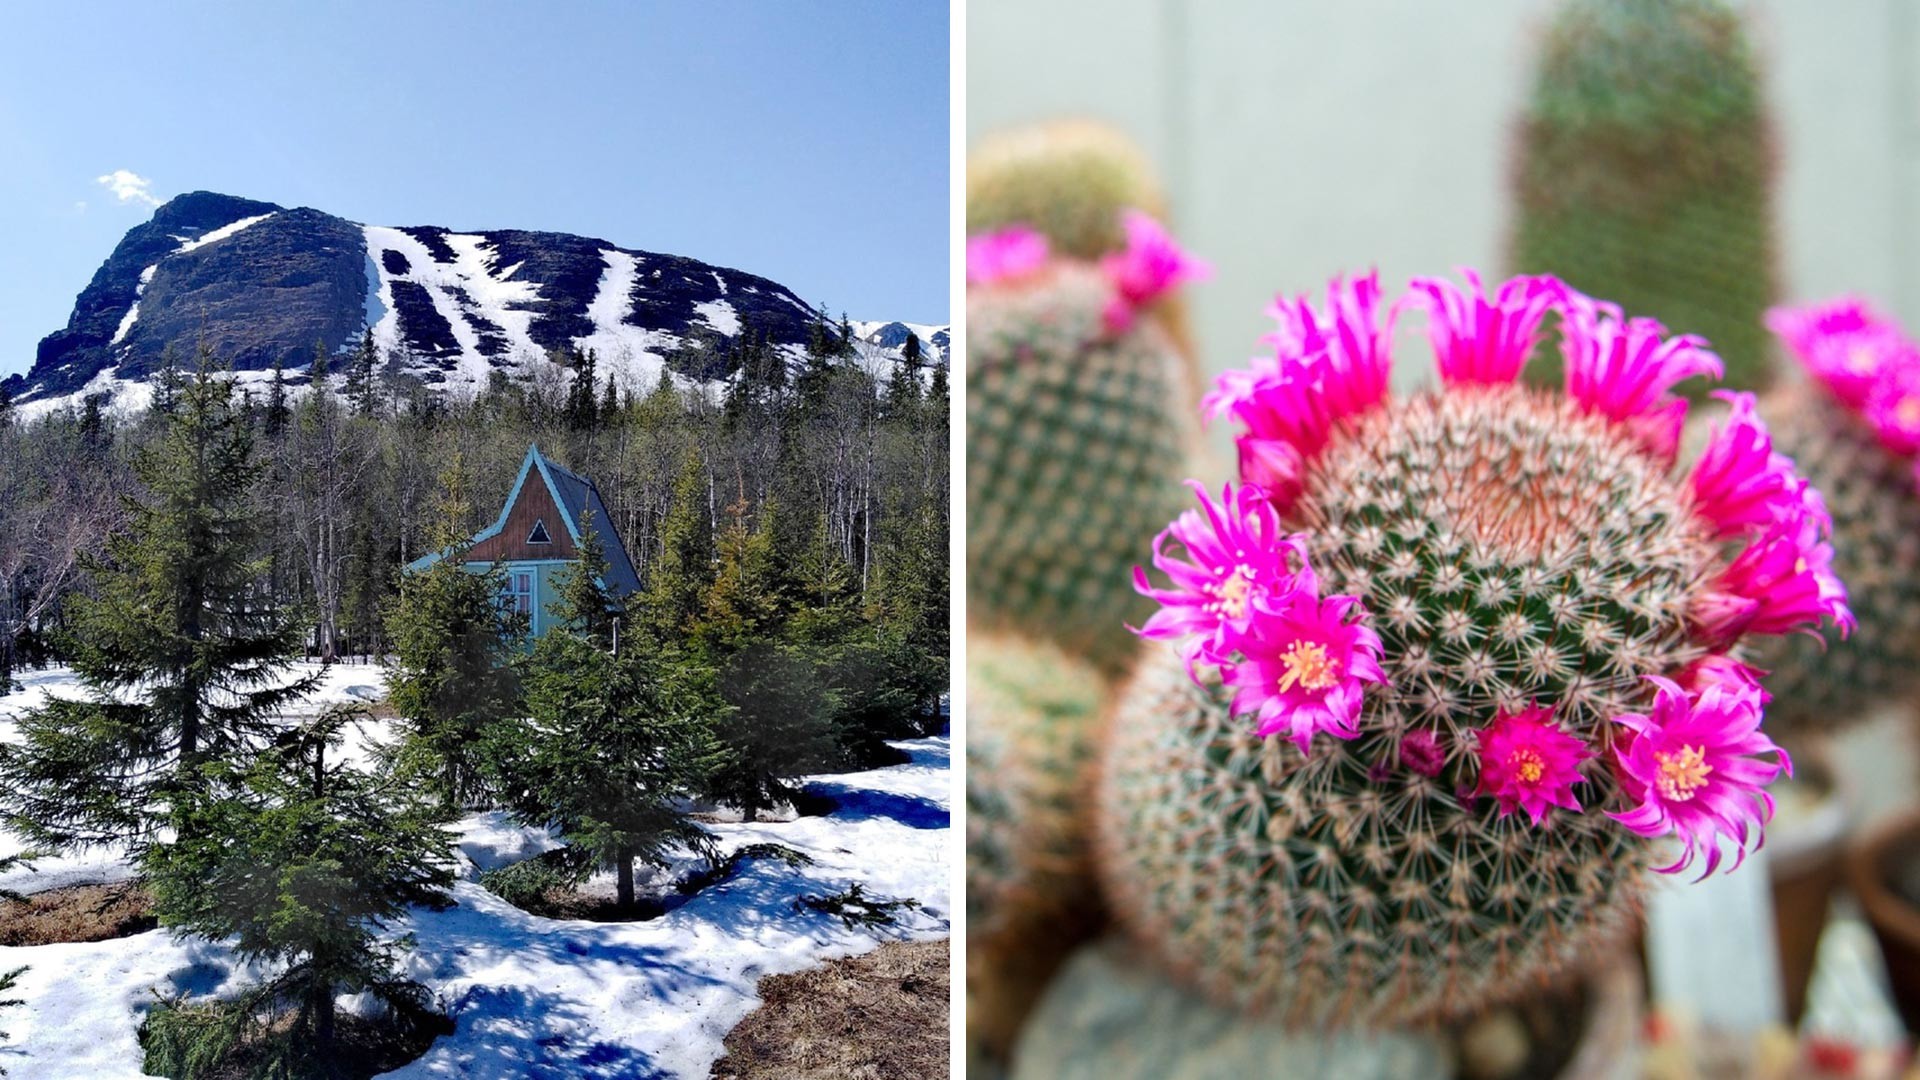 Can you imagine a cactus in the Arctic? But it's here!